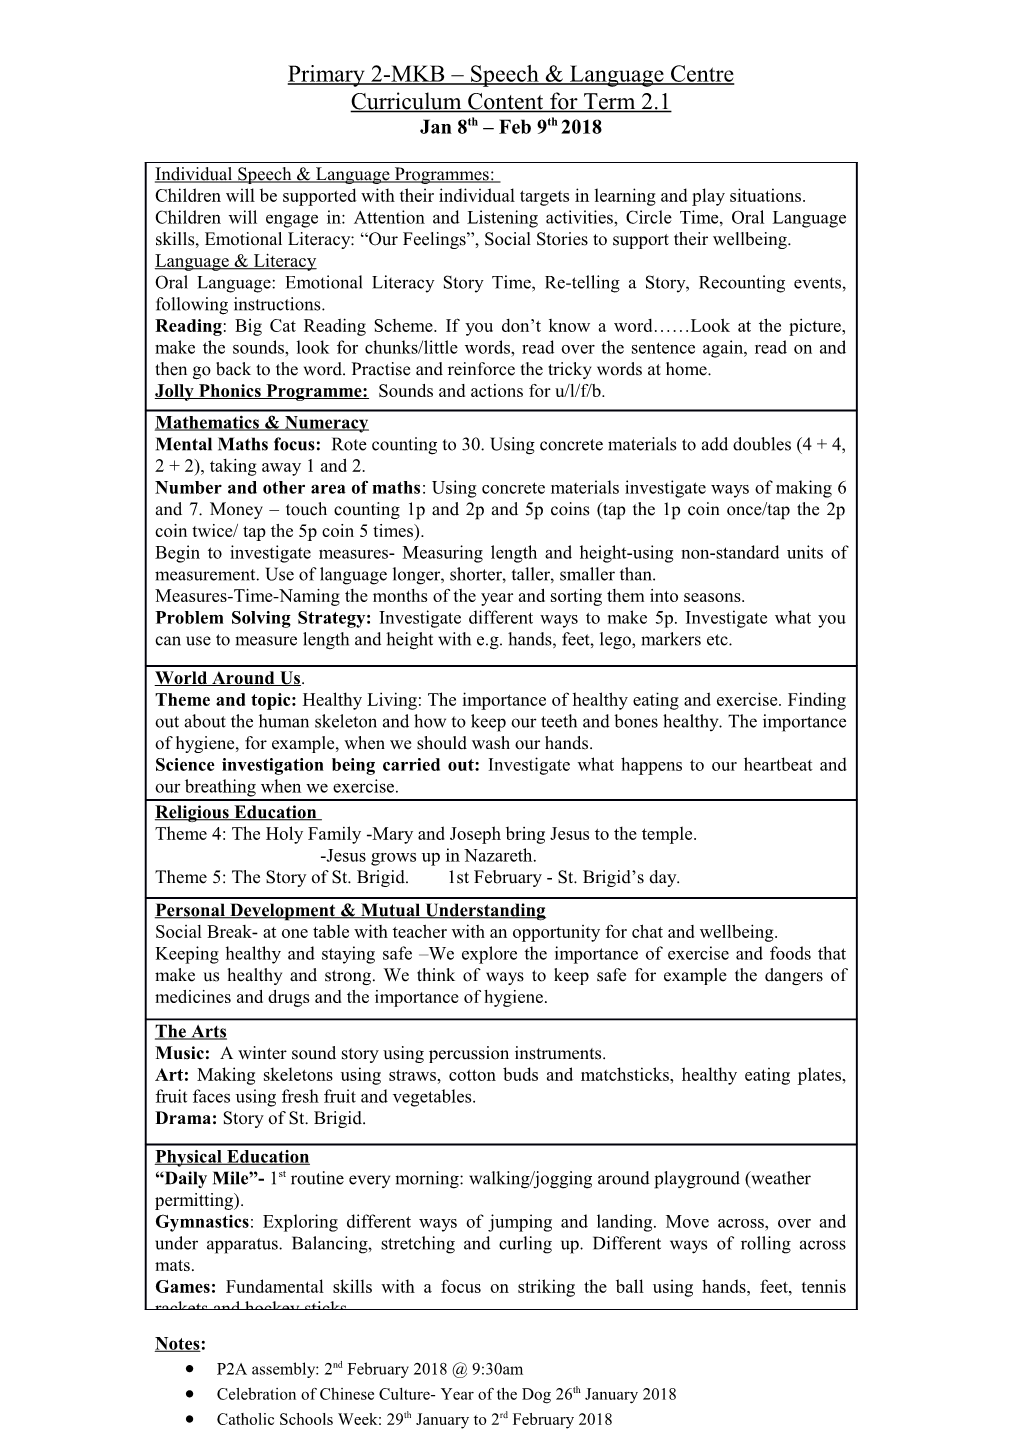 Year 4 Curriculum Content for Term 2A